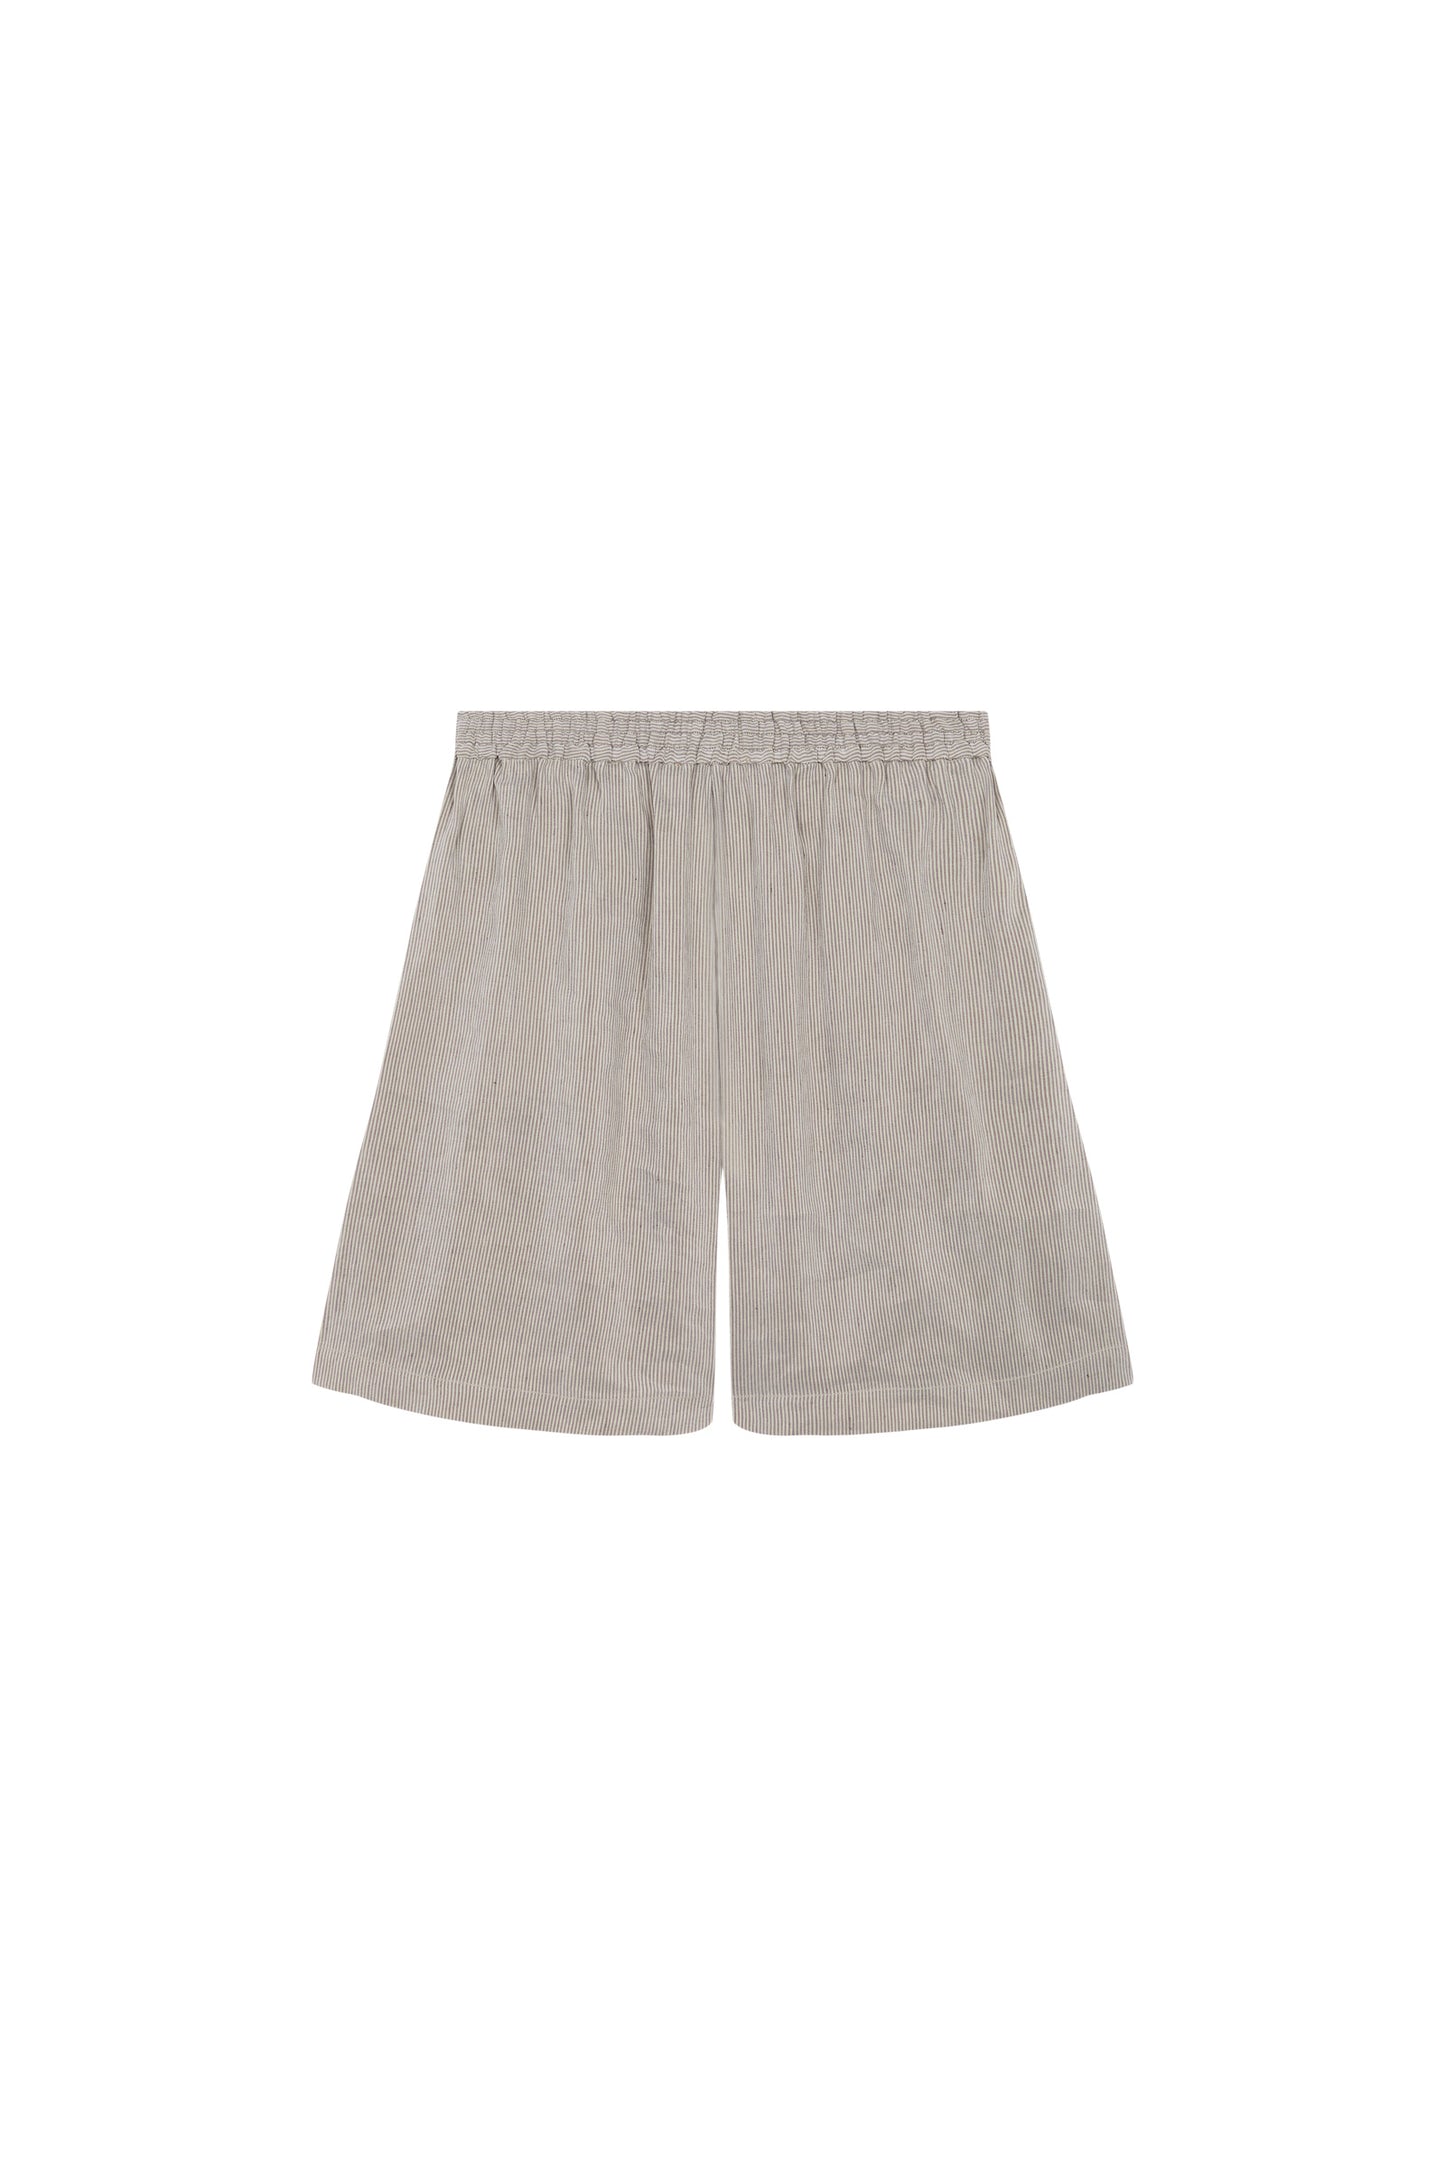 Cleo, green striped linen and silk shorts